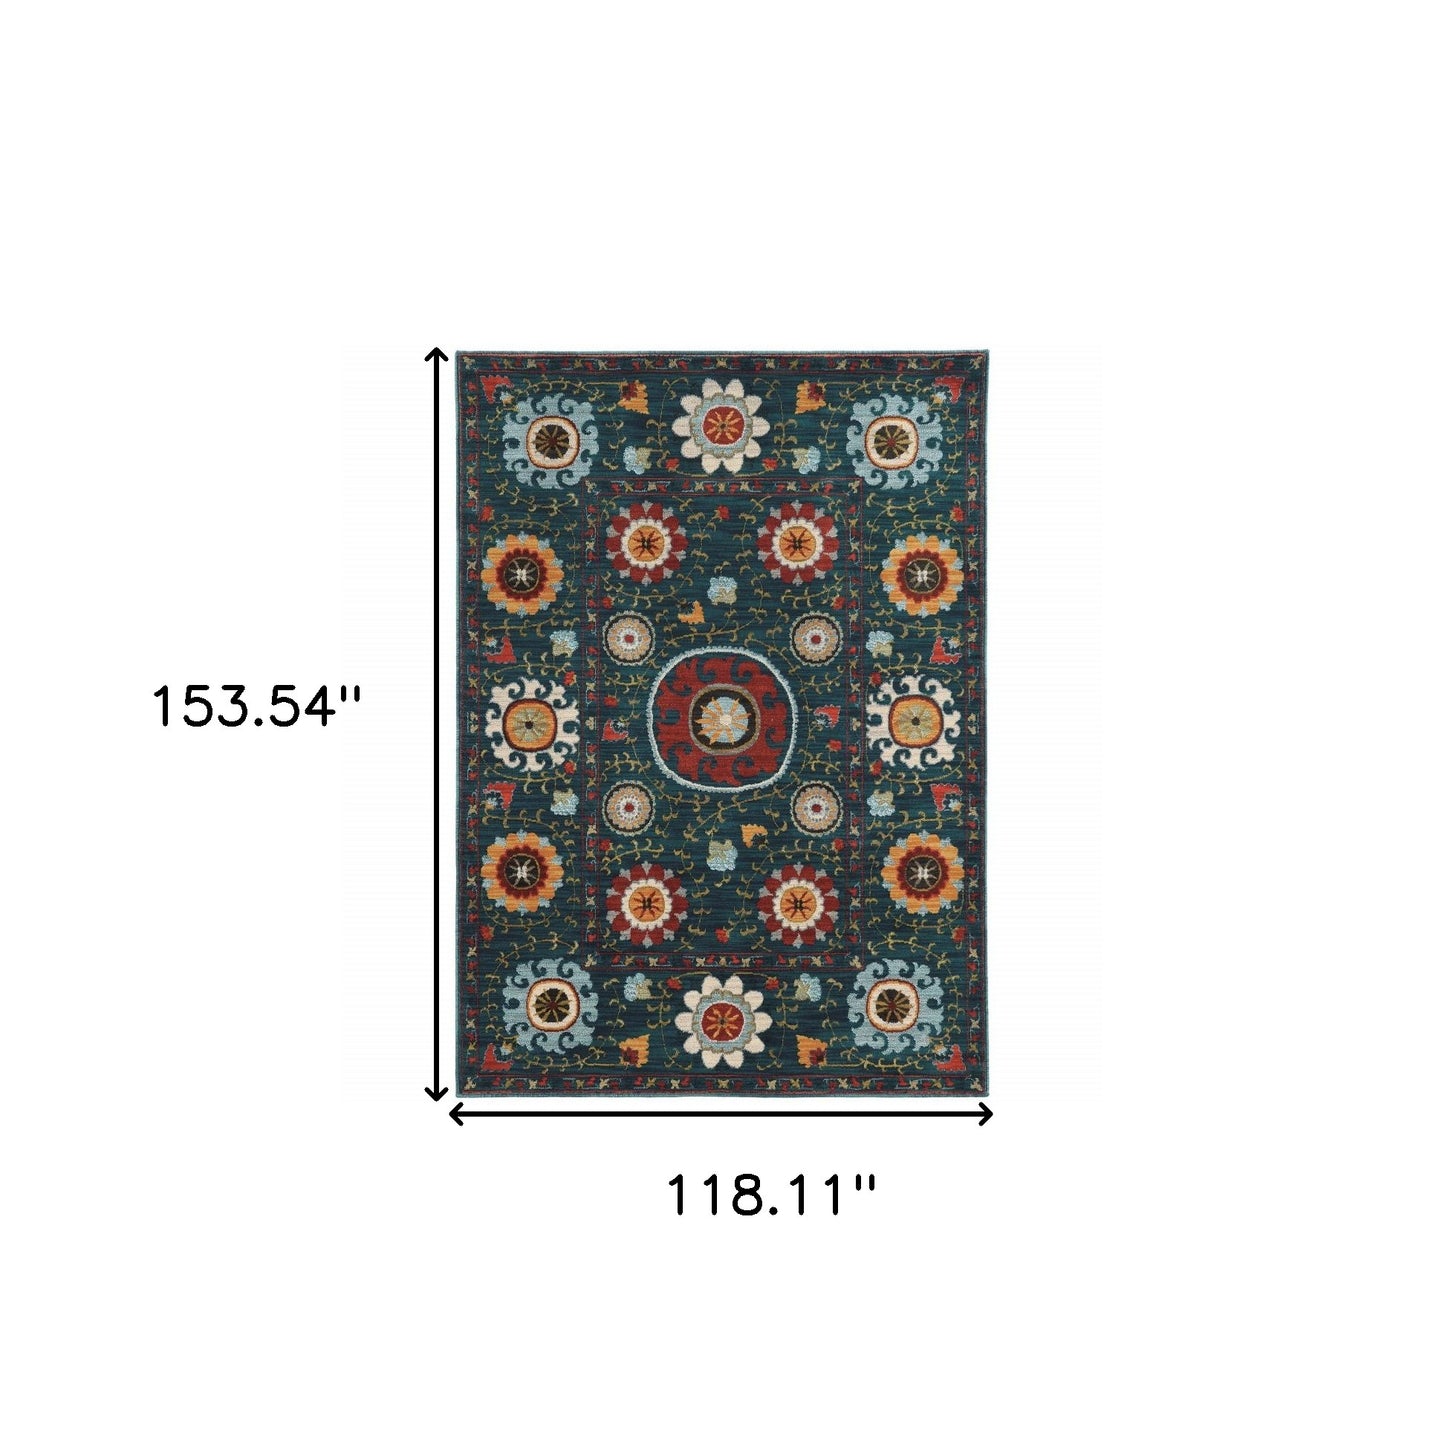 10' X 13' Teal Blue Rust Gold And Ivory Floral Power Loom Stain Resistant Area Rug